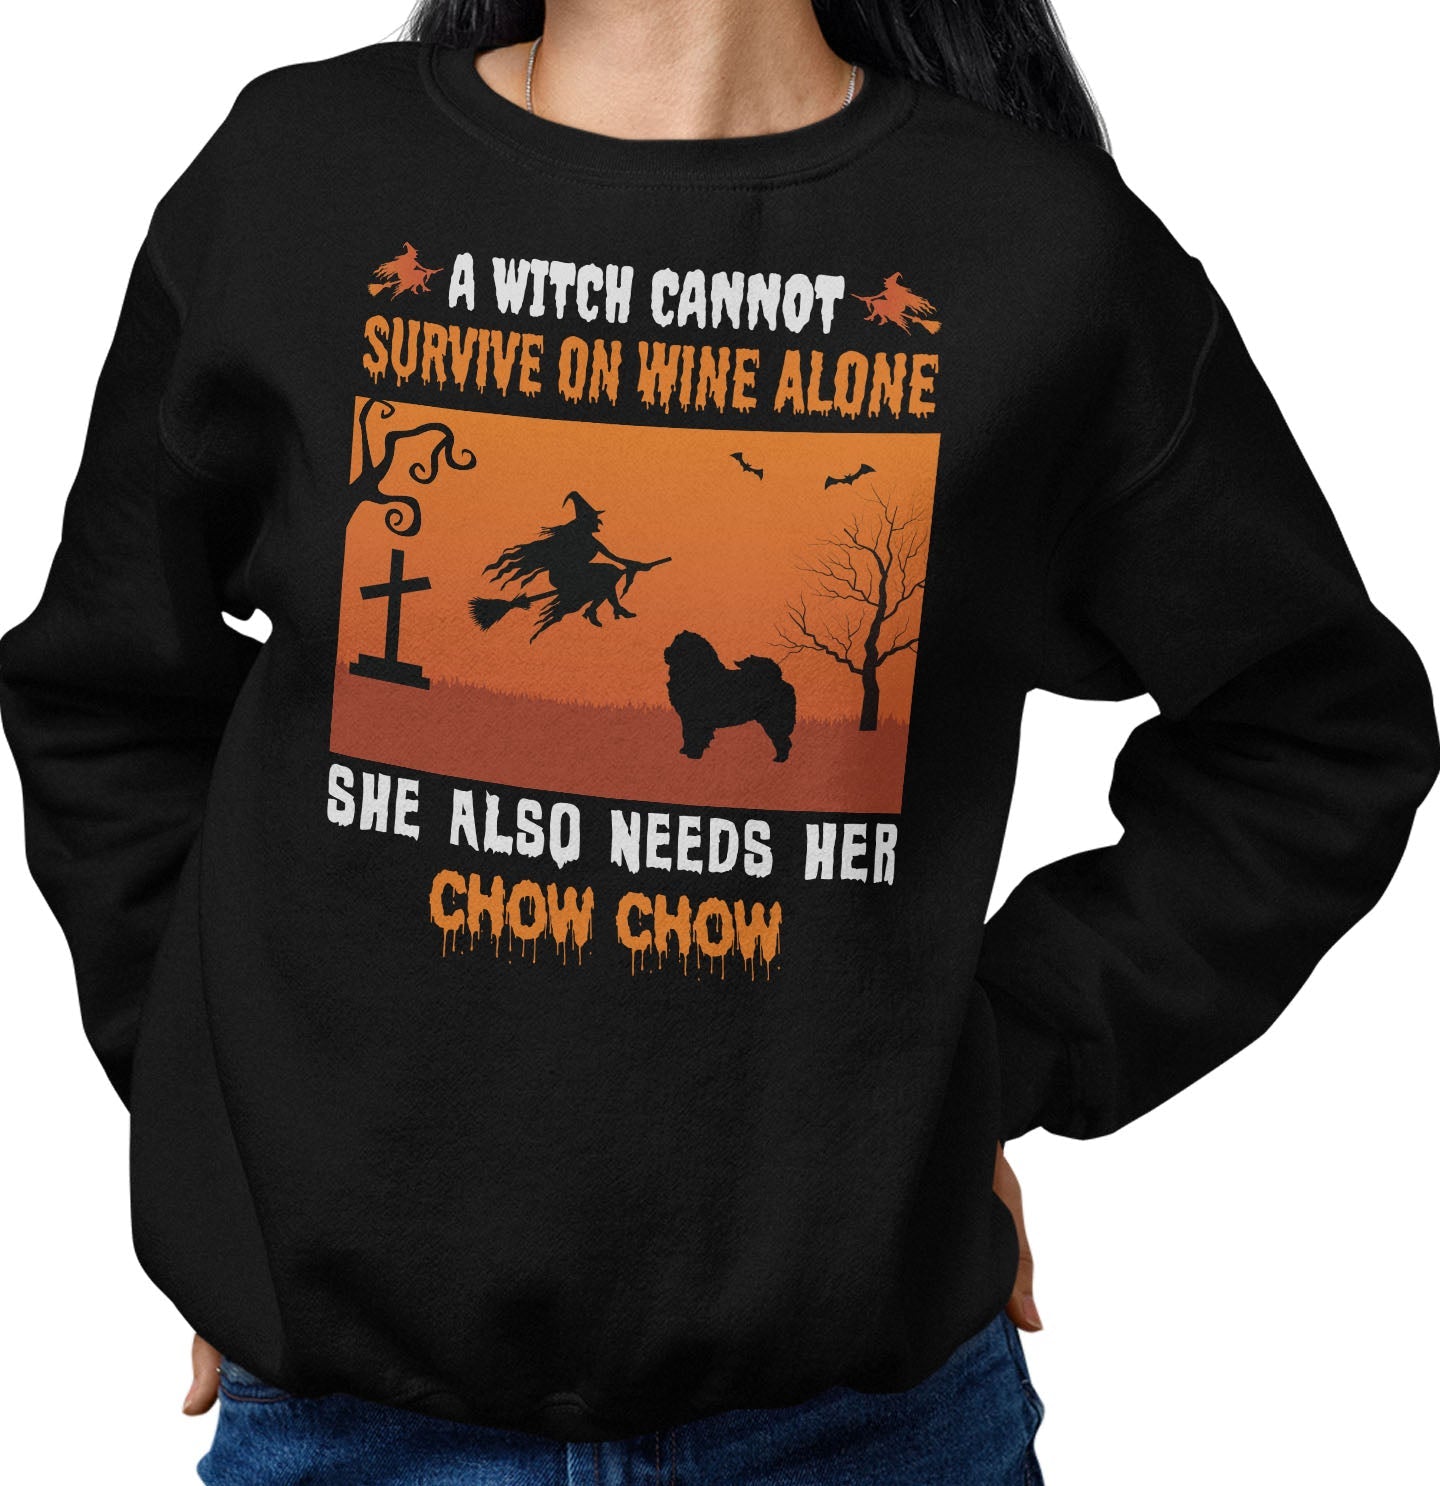 A Witch Needs Her Chow Chow - Adult Unisex Crewneck Sweatshirt